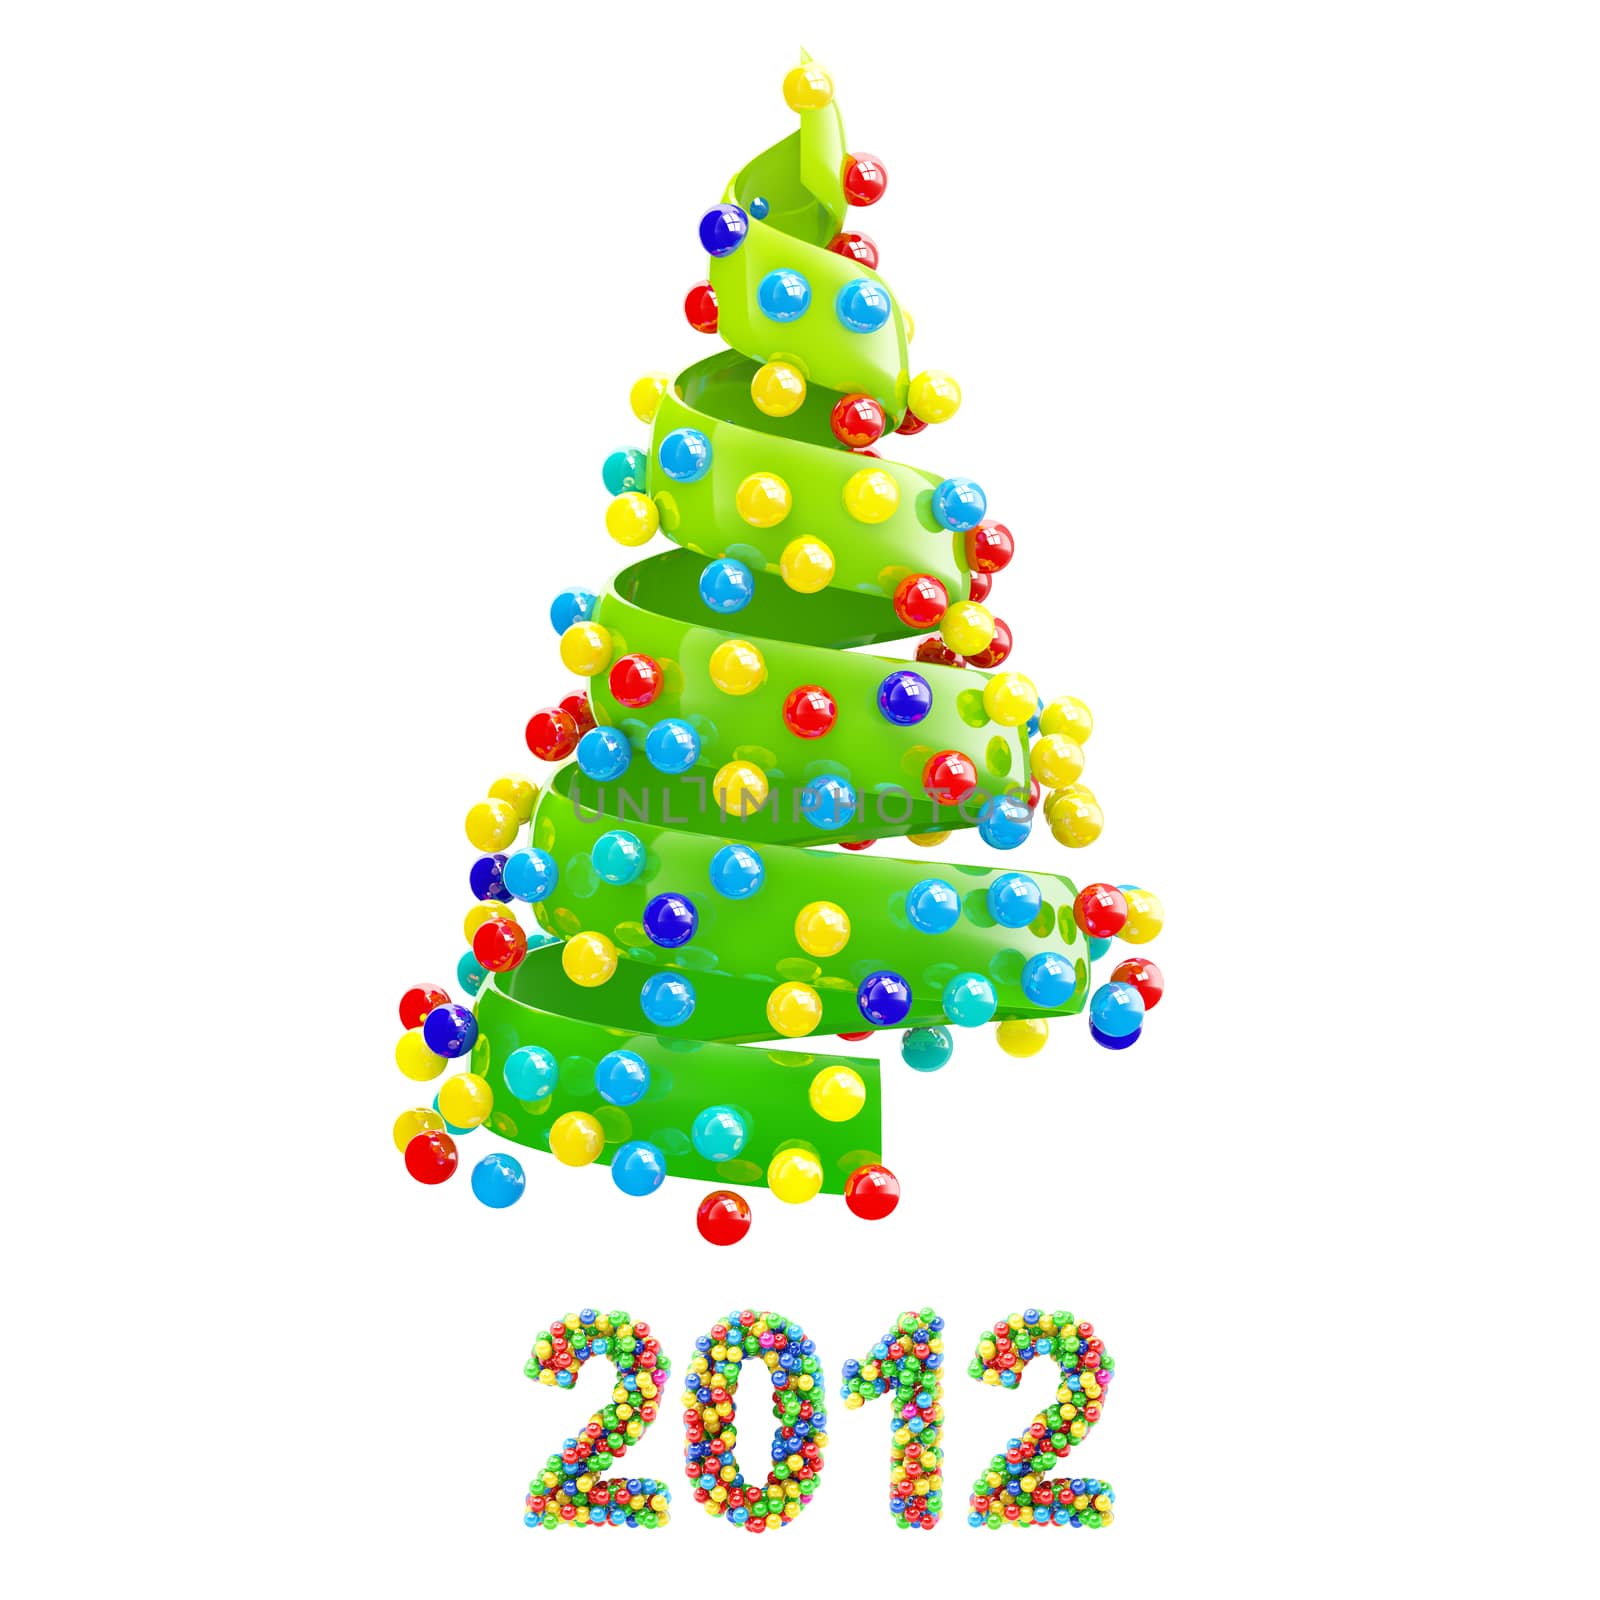 Christmas tree with colorful 2012 text by maxkabakov